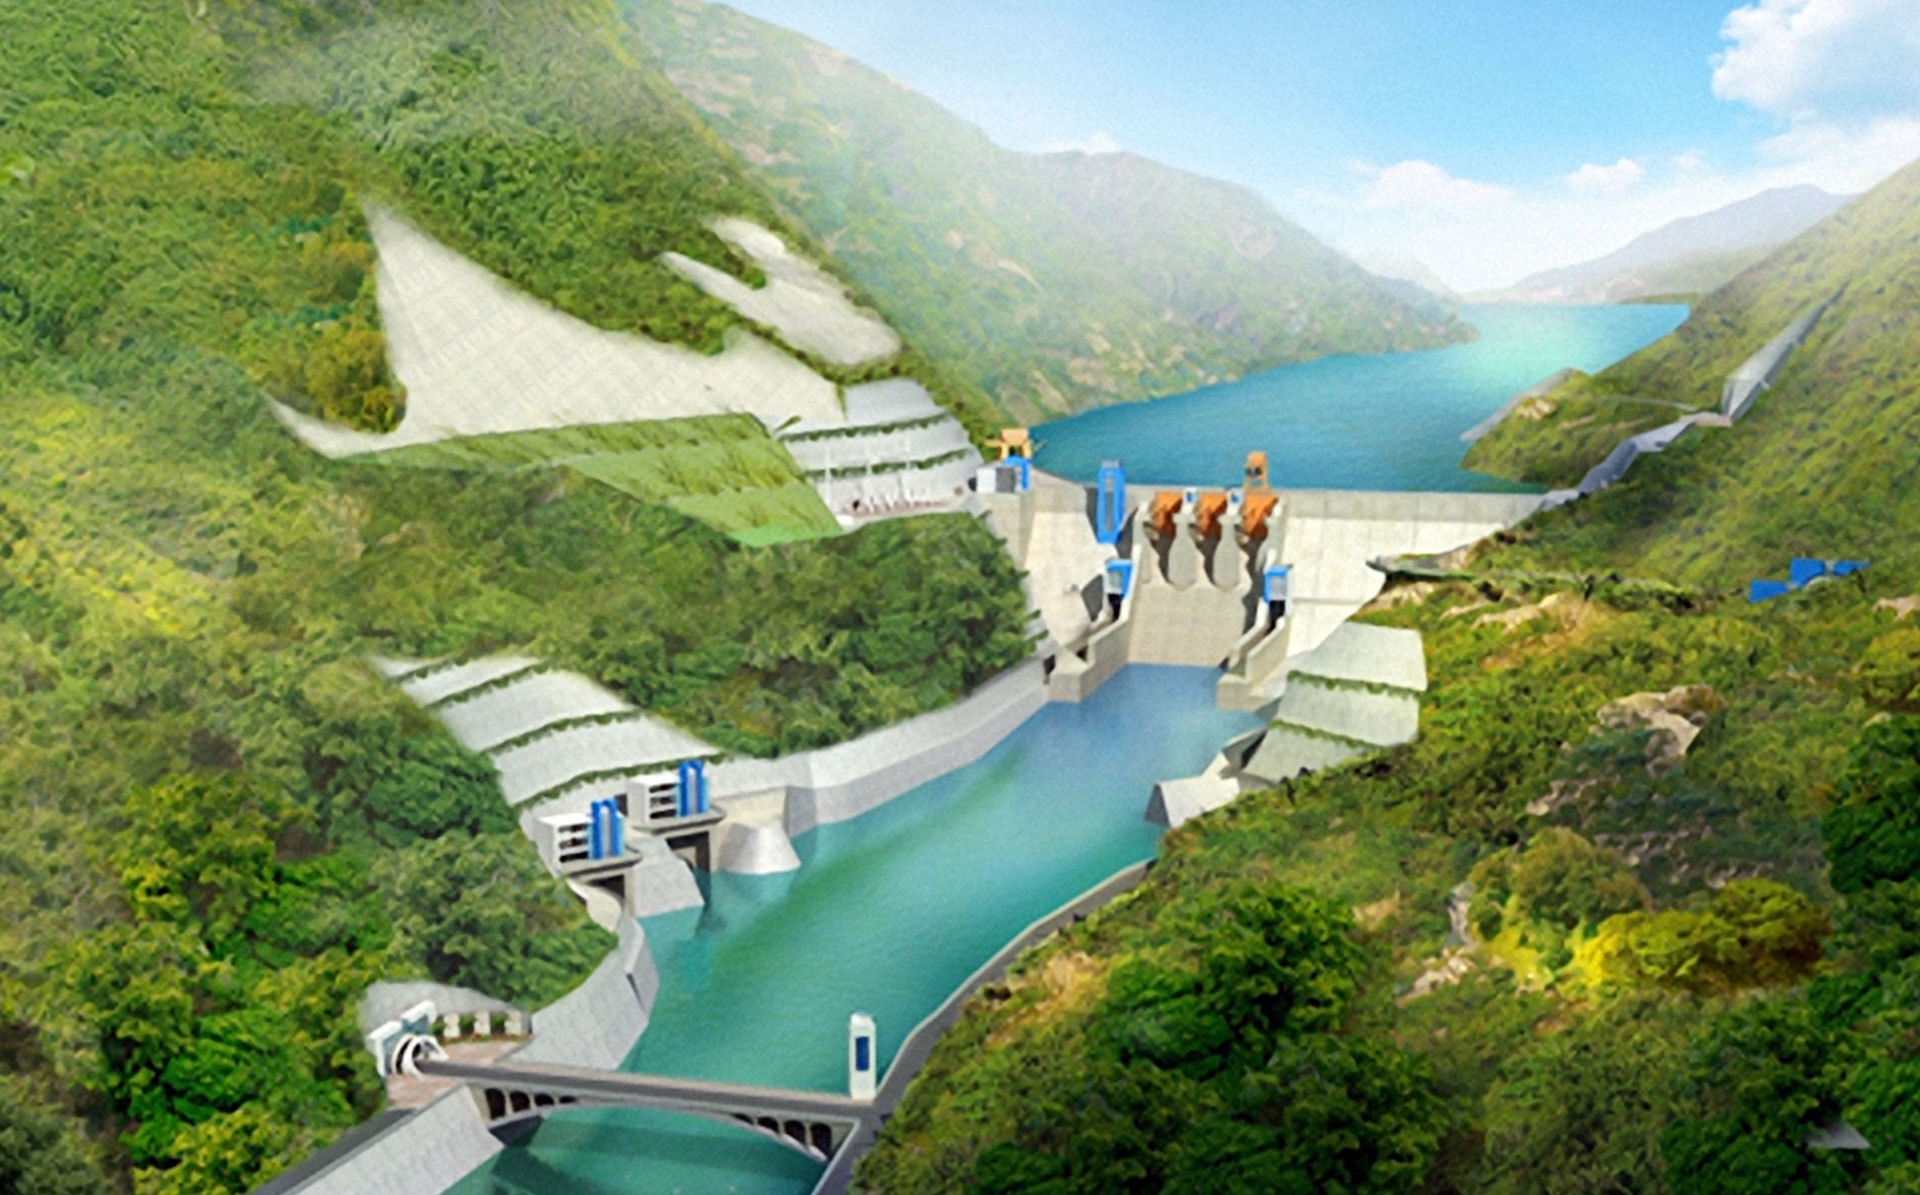 Wunonglong Hydroelectric Power Station